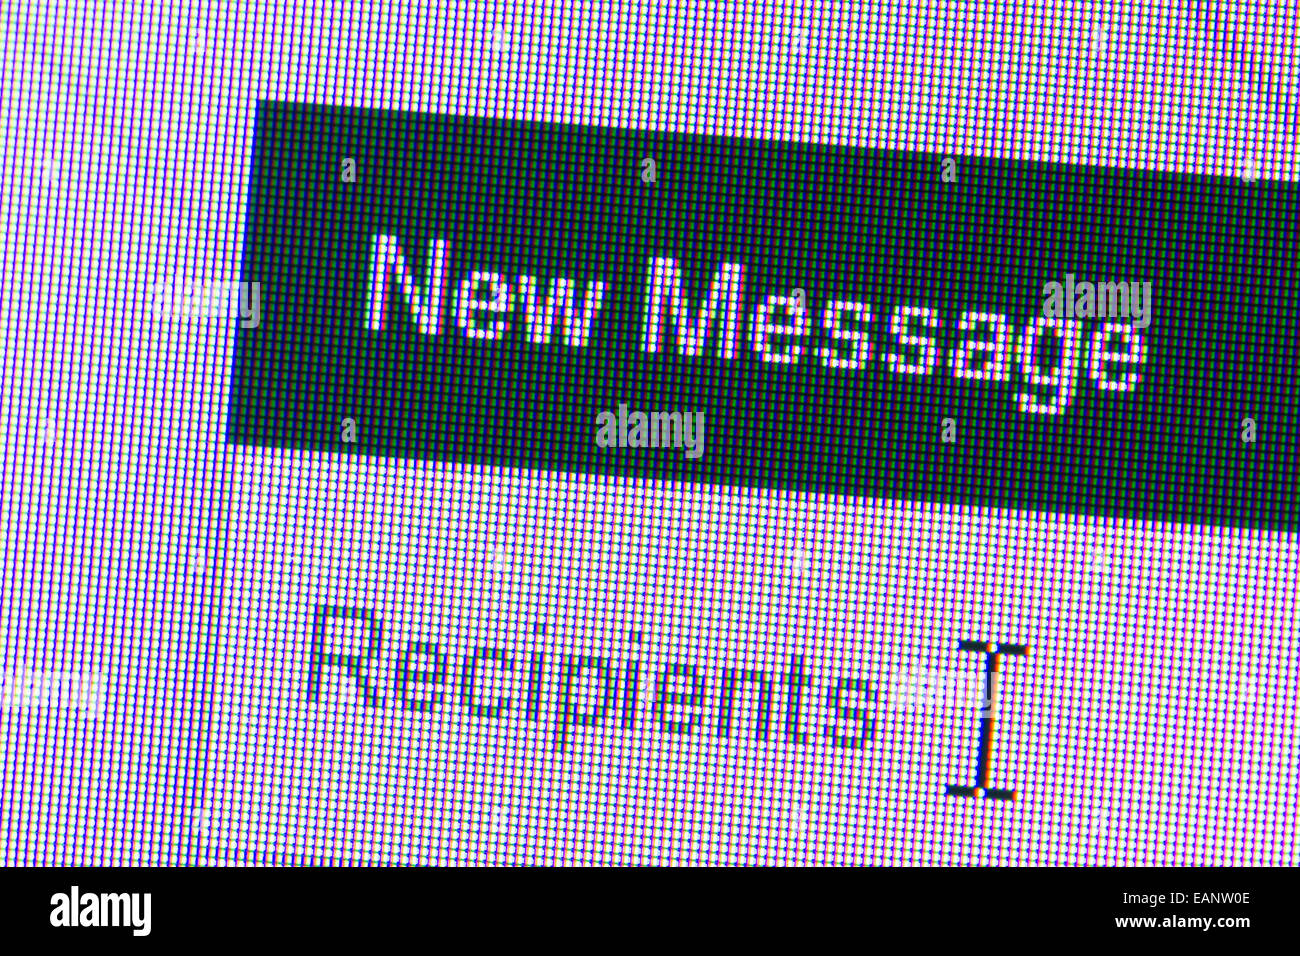 New message window. Macro screen view of old monitor Stock Photo